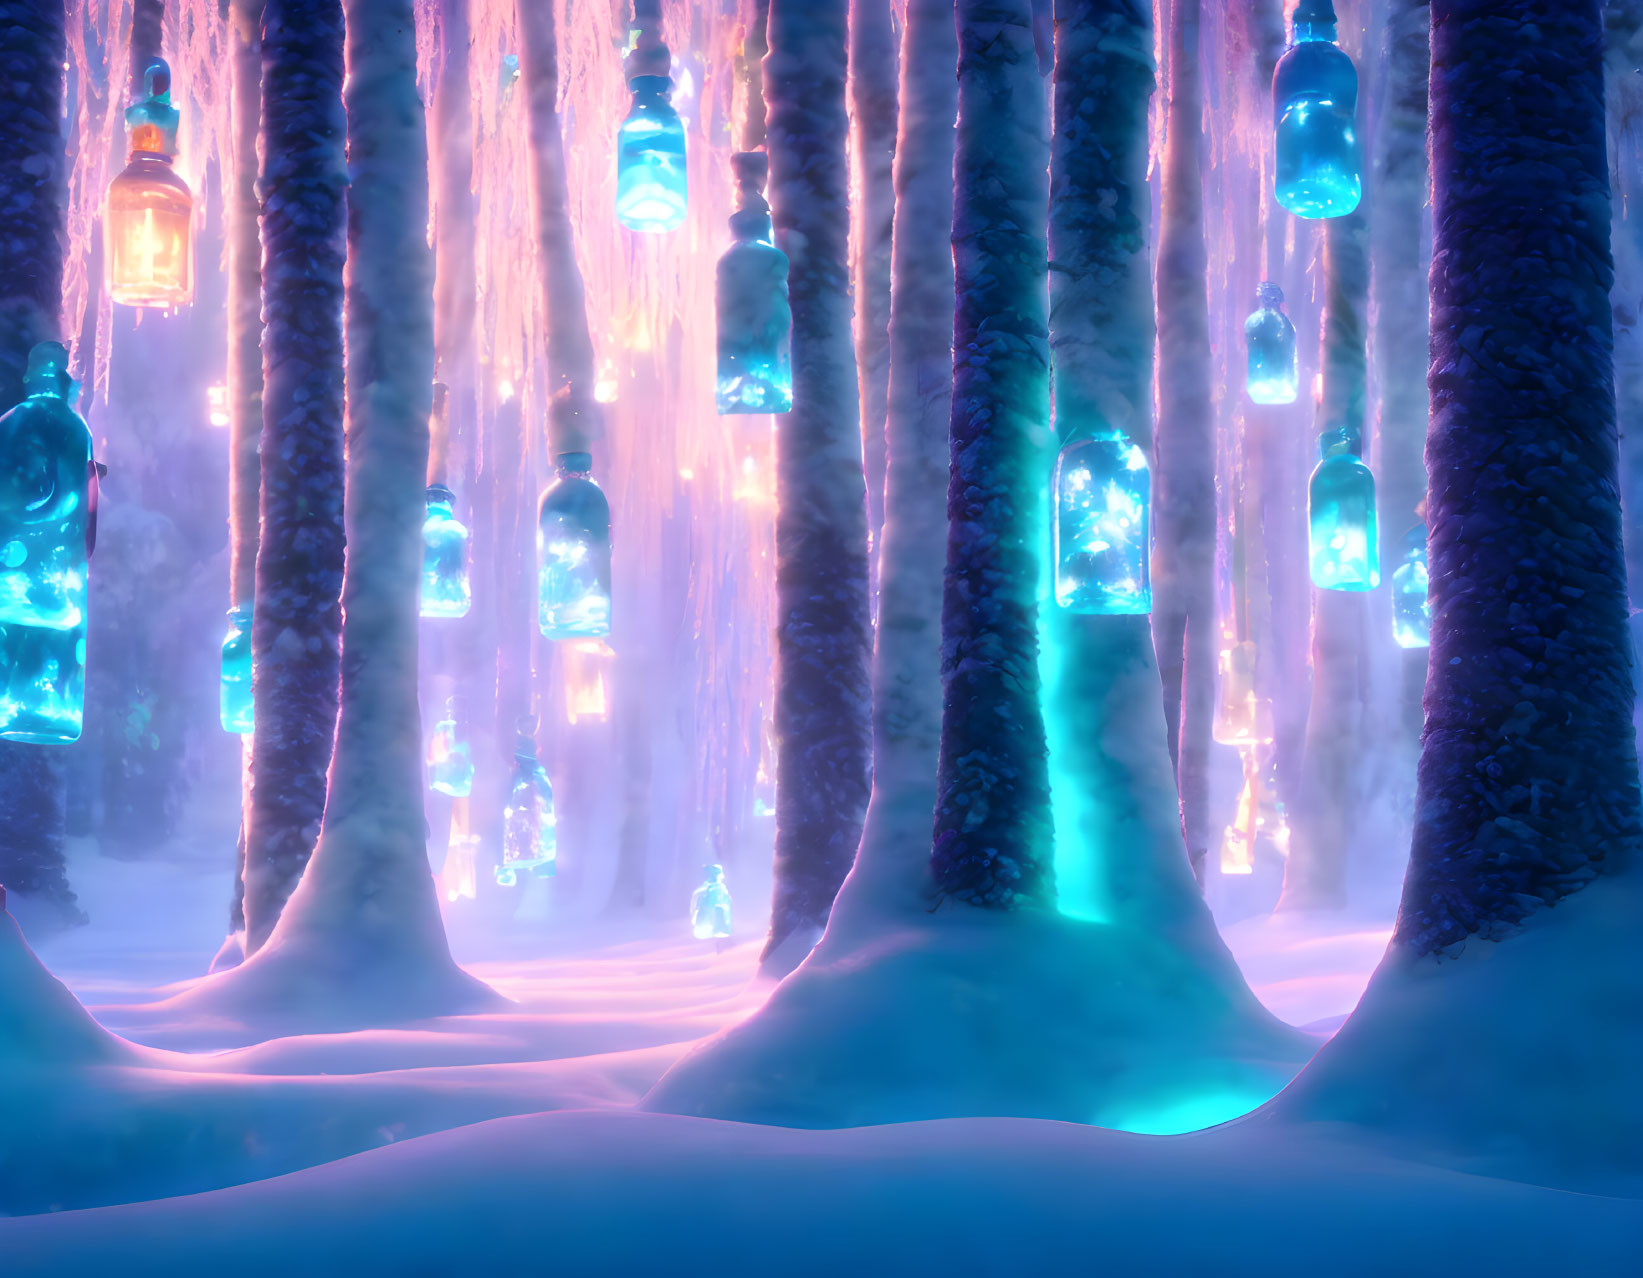 Snow-covered forest with glowing lanterns illuminating trees